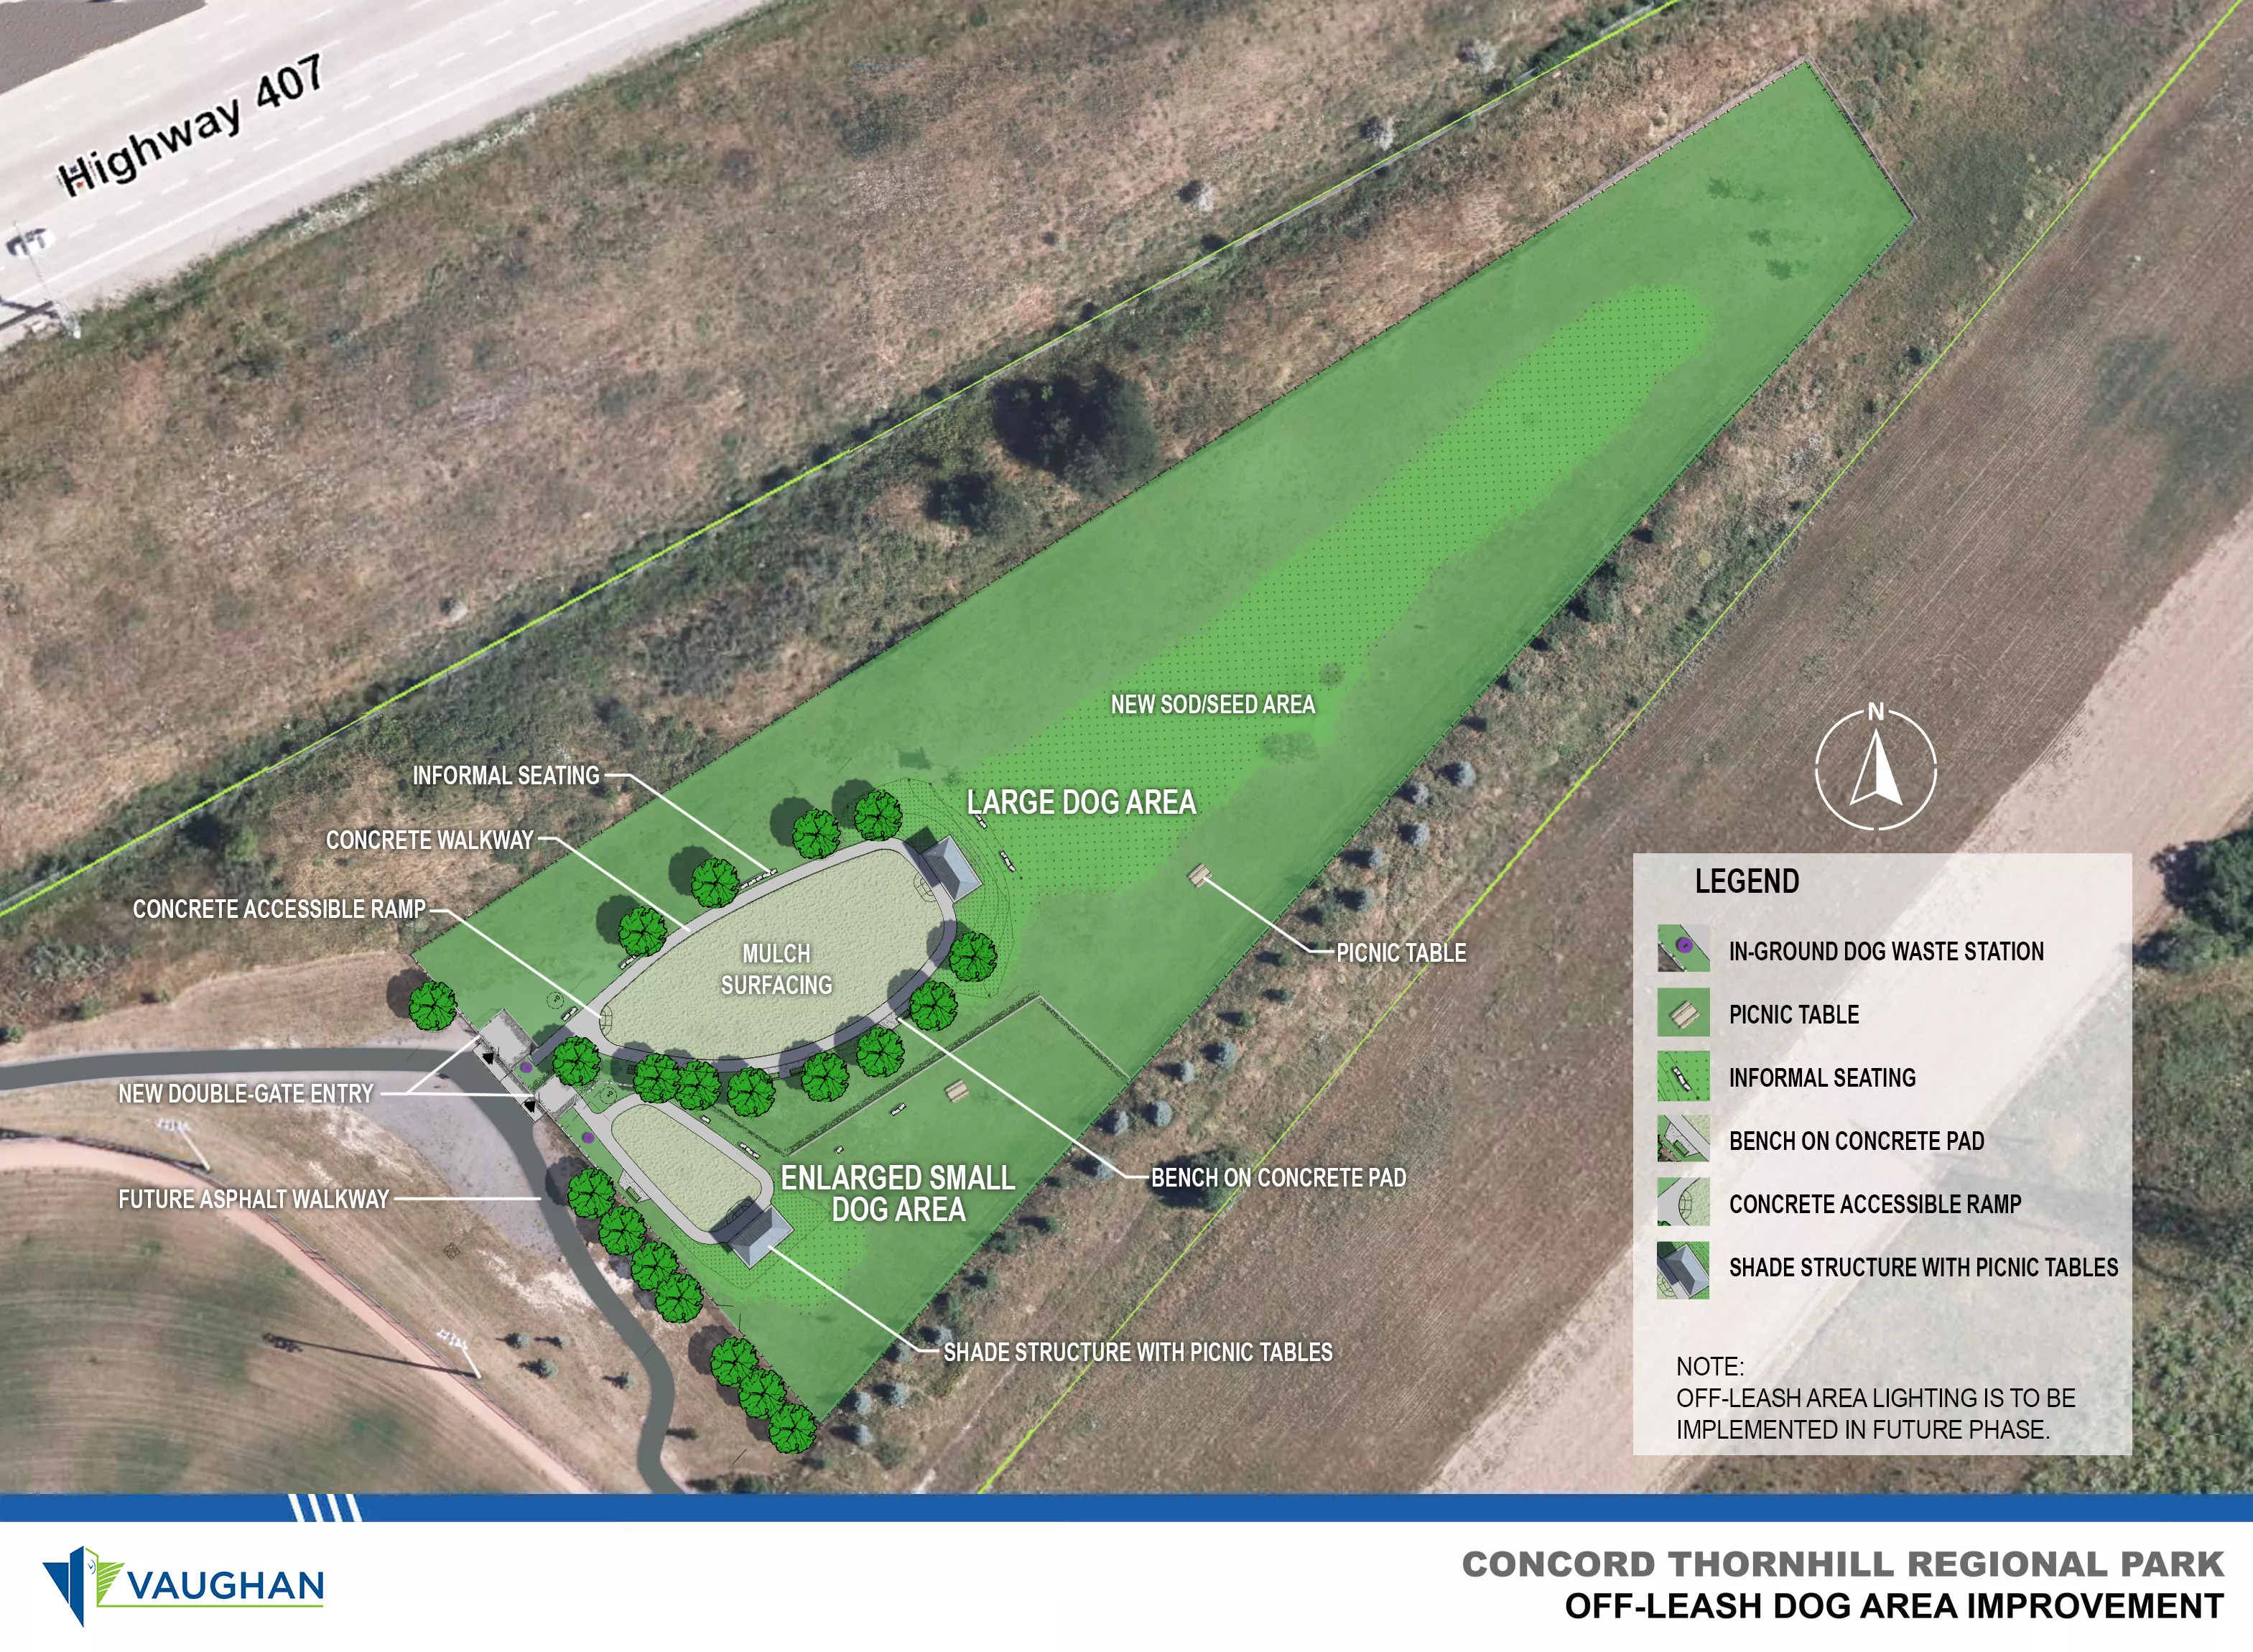 This is an aerial image of the off-leash dog park at Concord Thornhill Regional Park.